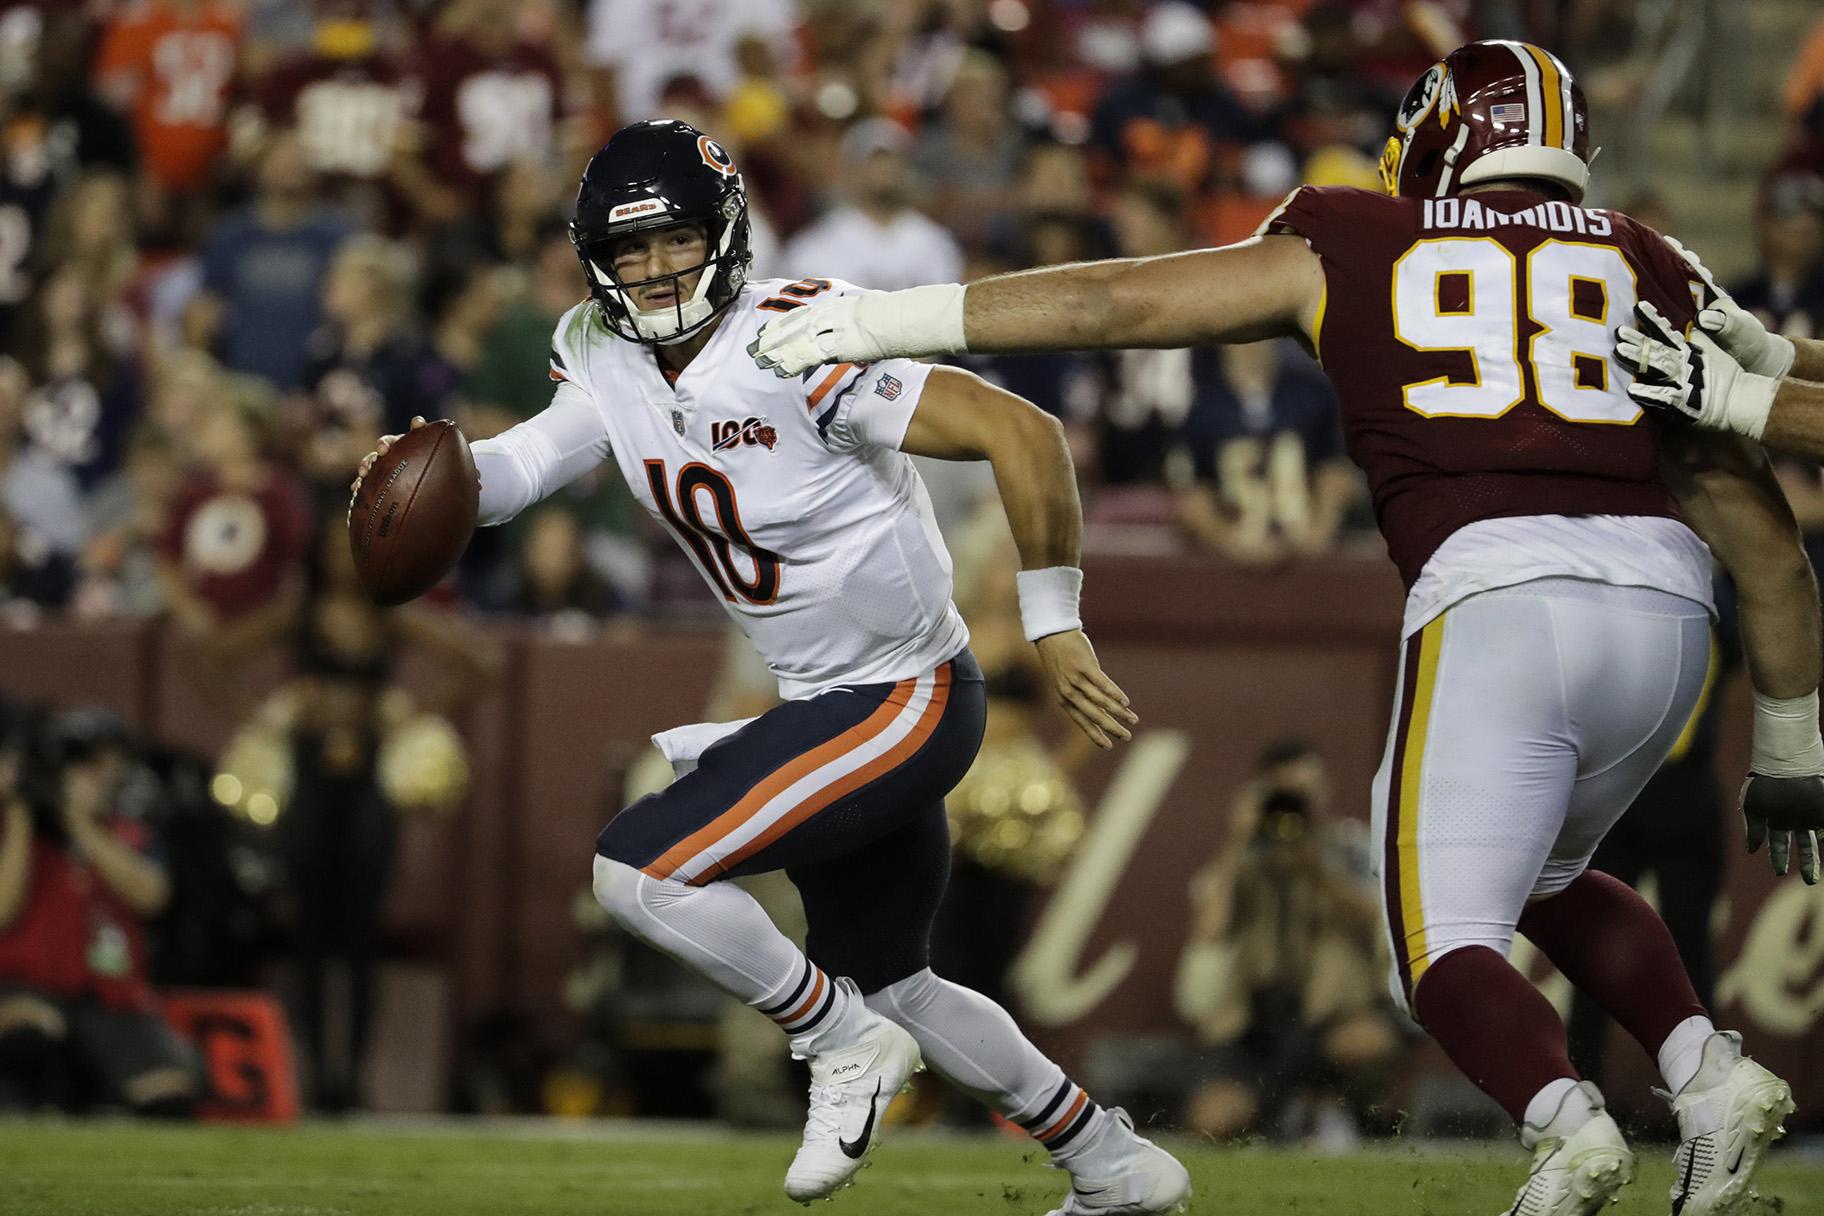 Chicago Bears quarterback Mitchell Trubisky (10) works to escape Washington Redskins defensive end Matthew Ioannidis (98) during the second half of an NFL football game Monday, Sept. 23, 2019, in Landover, Md. (AP Photo / Julio Cortez)